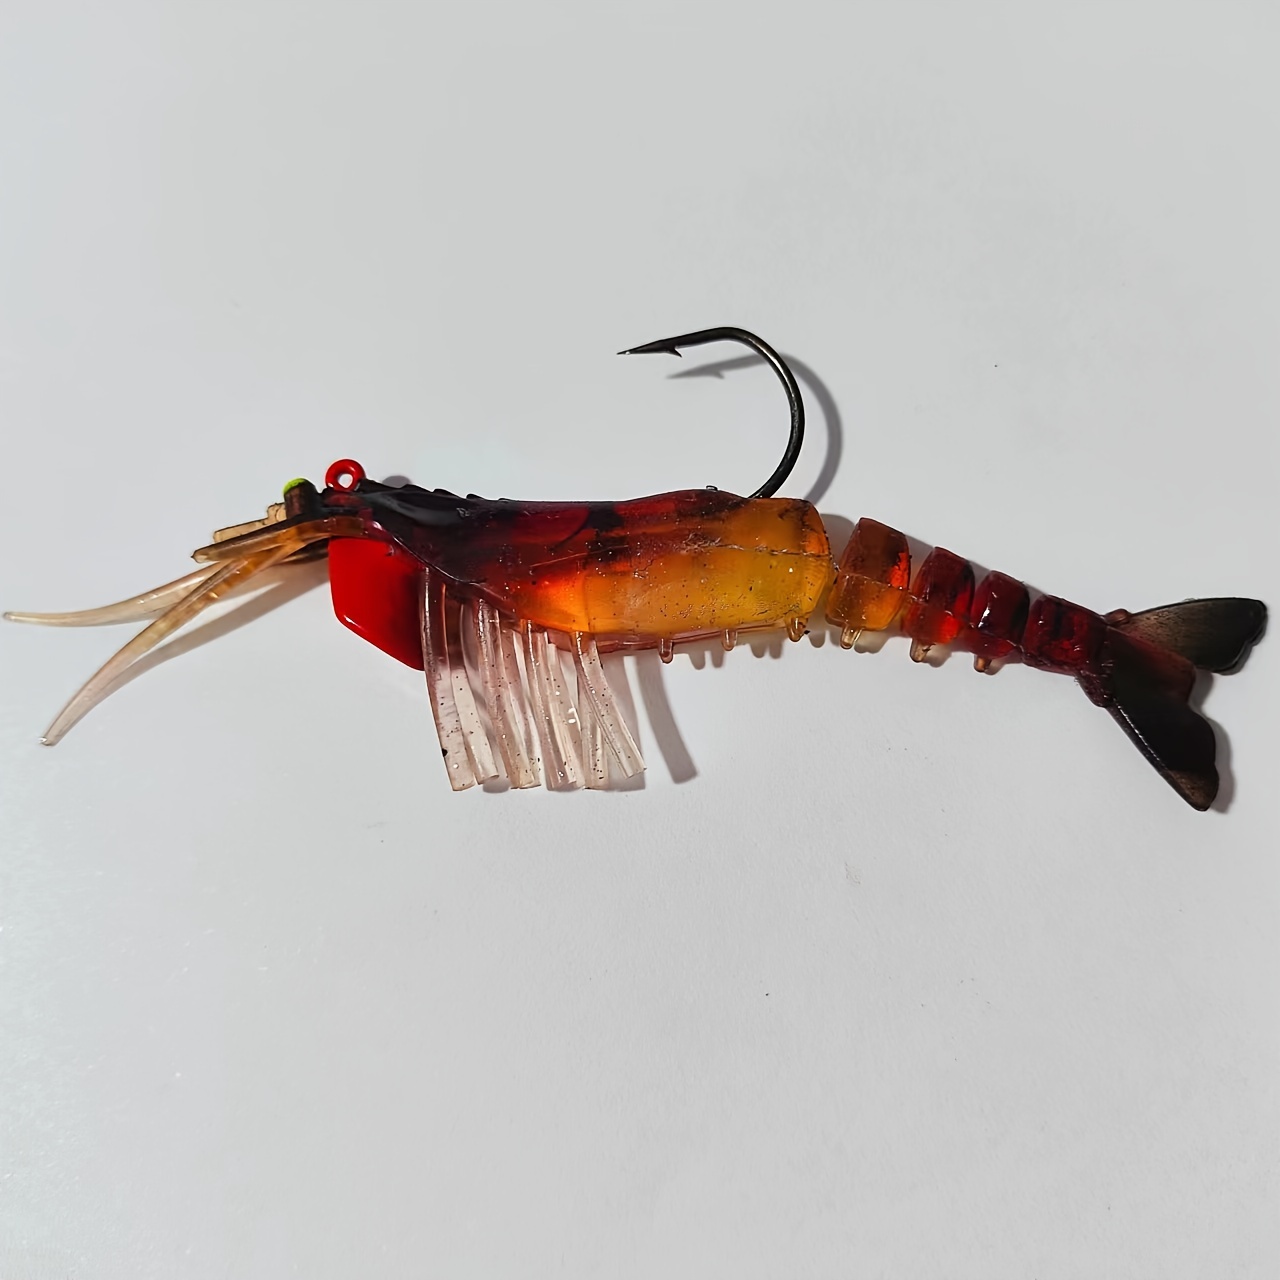  WINOMO Soft Fishing Lure with Fishing Hook Artificial